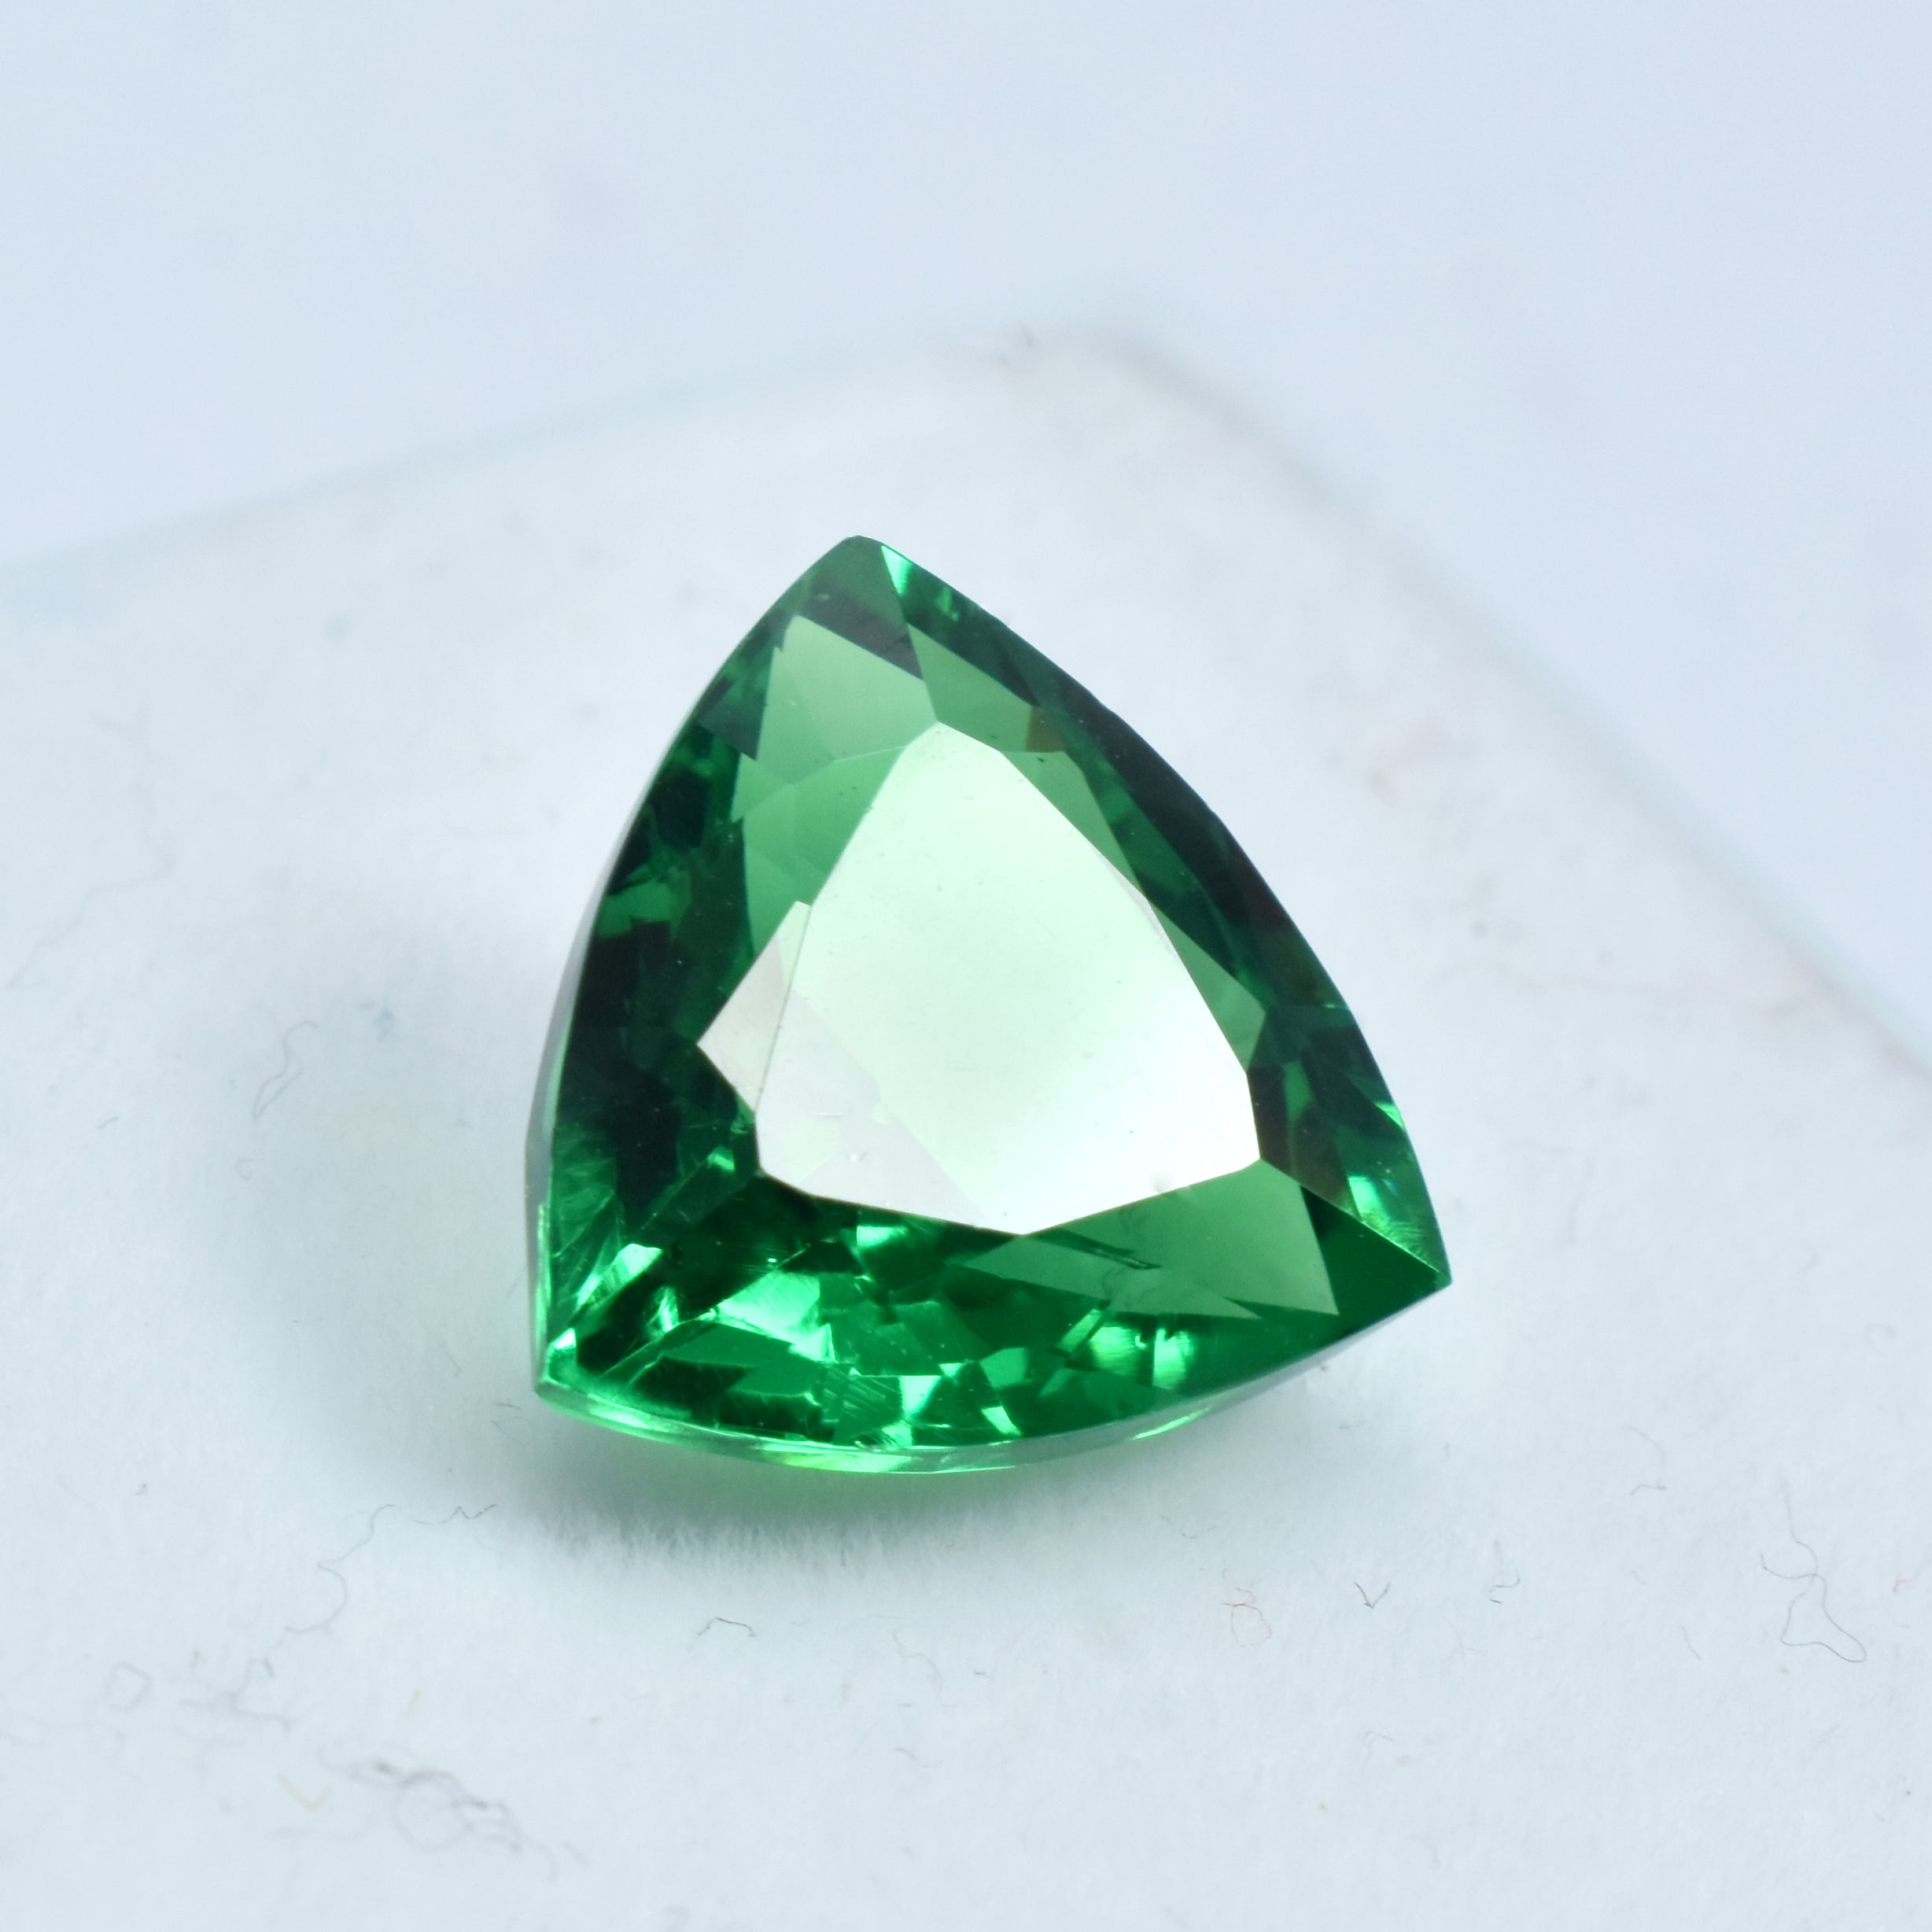 "Garnet Gems Jewelry For Engagement Rings " Trillion Cut 12.32 Carat Green Garnet Natural Certified Loose Gemstone | Free Delivery Free Gift | Gift For Her